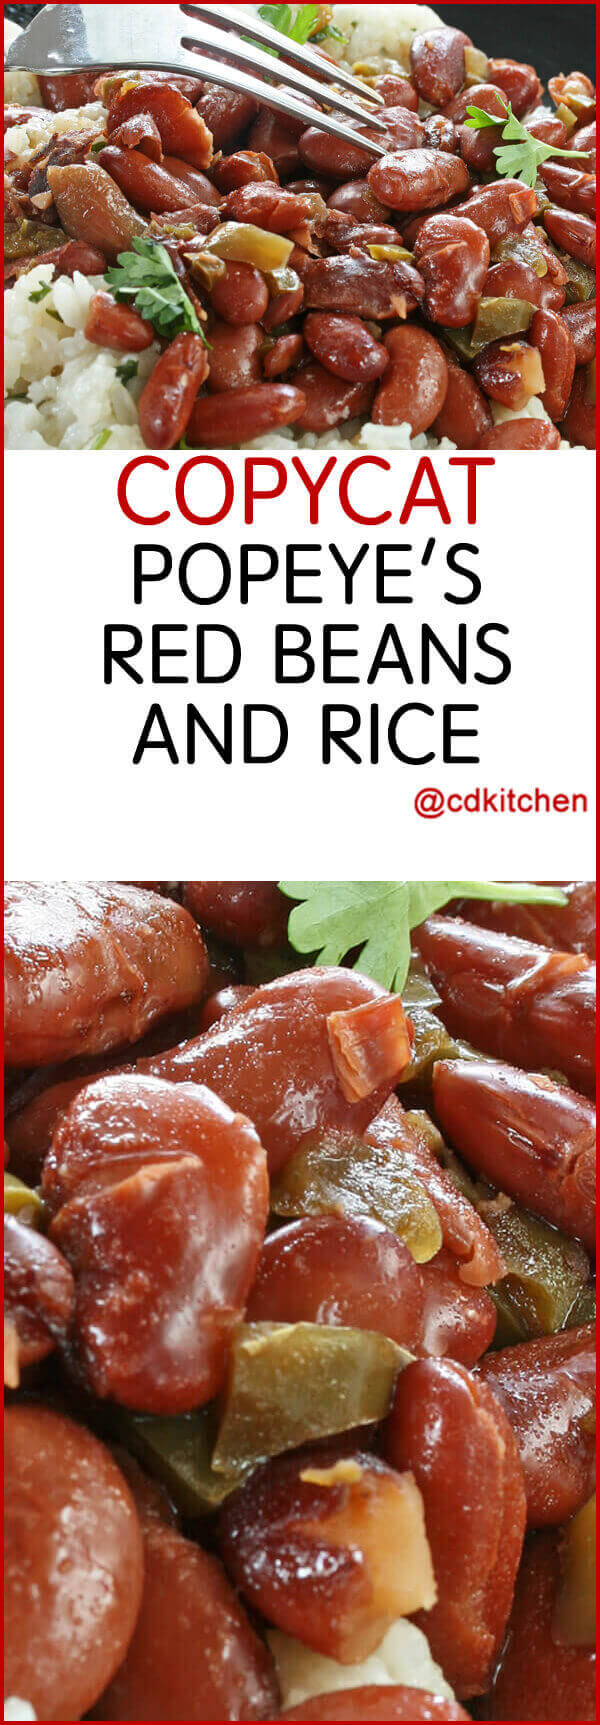 Copycat Popeye's Red Beans and Rice Recipe | CDKitchen.com